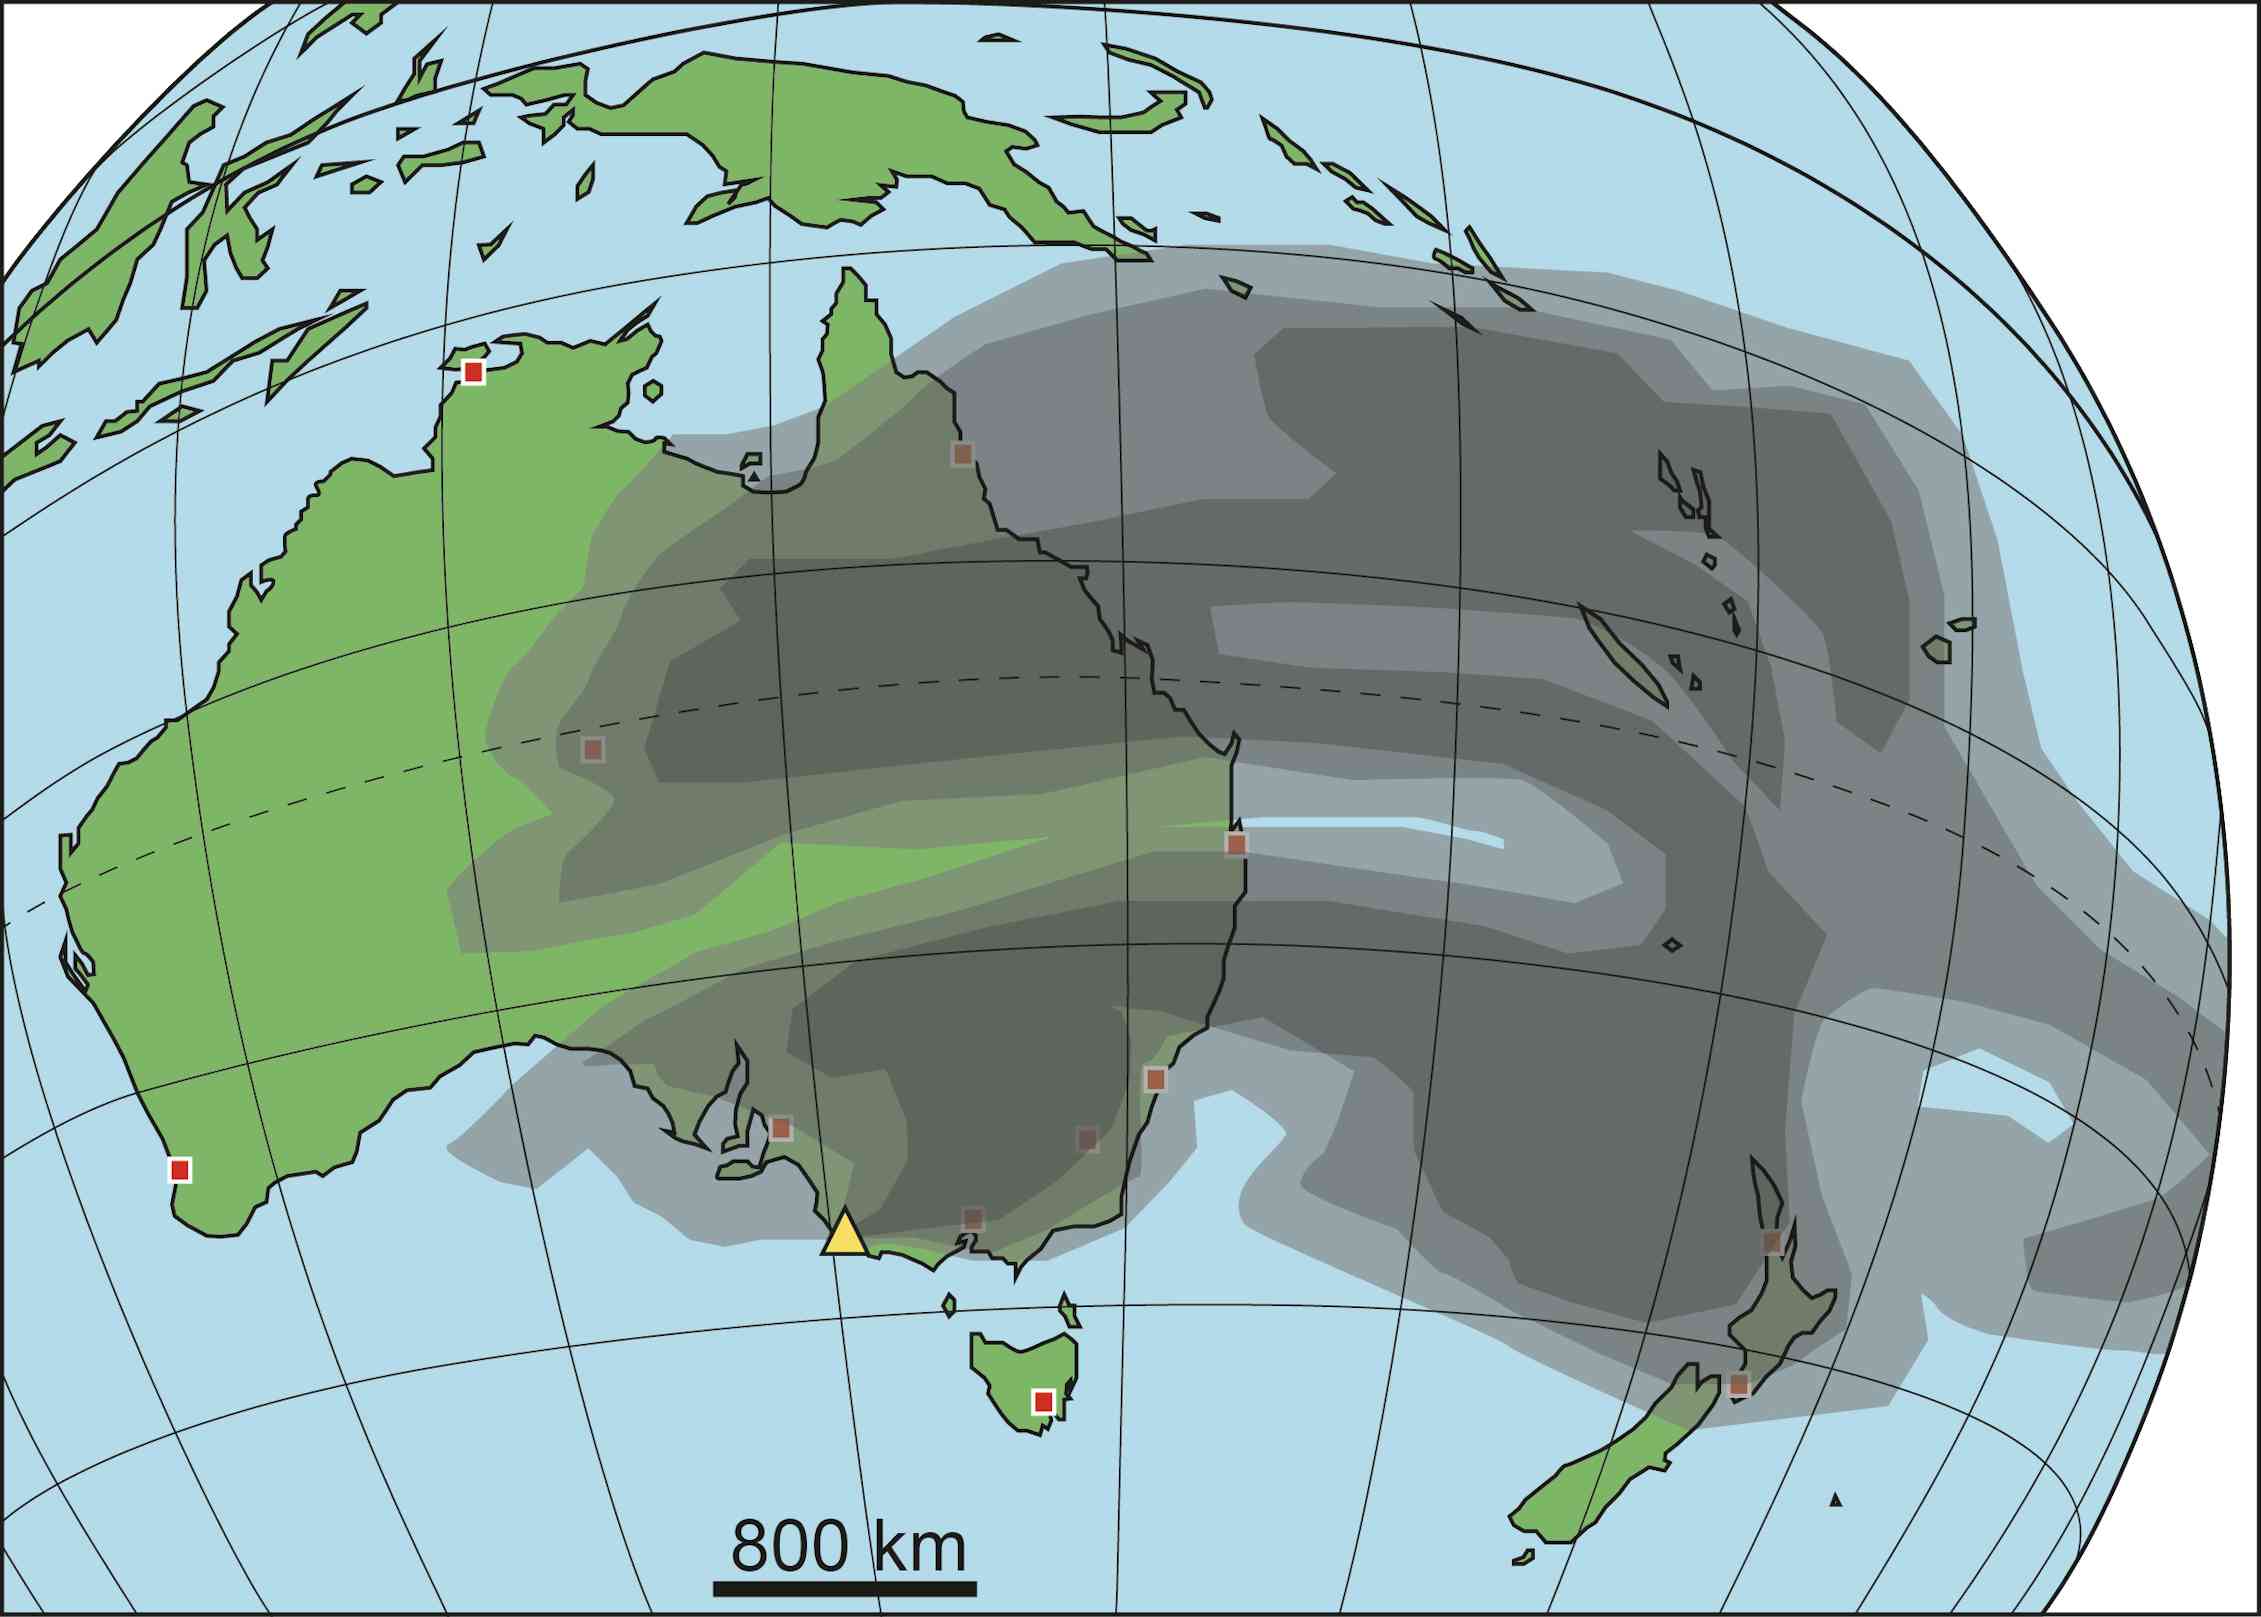 Australia's volcanic history is a lot more recent than you think